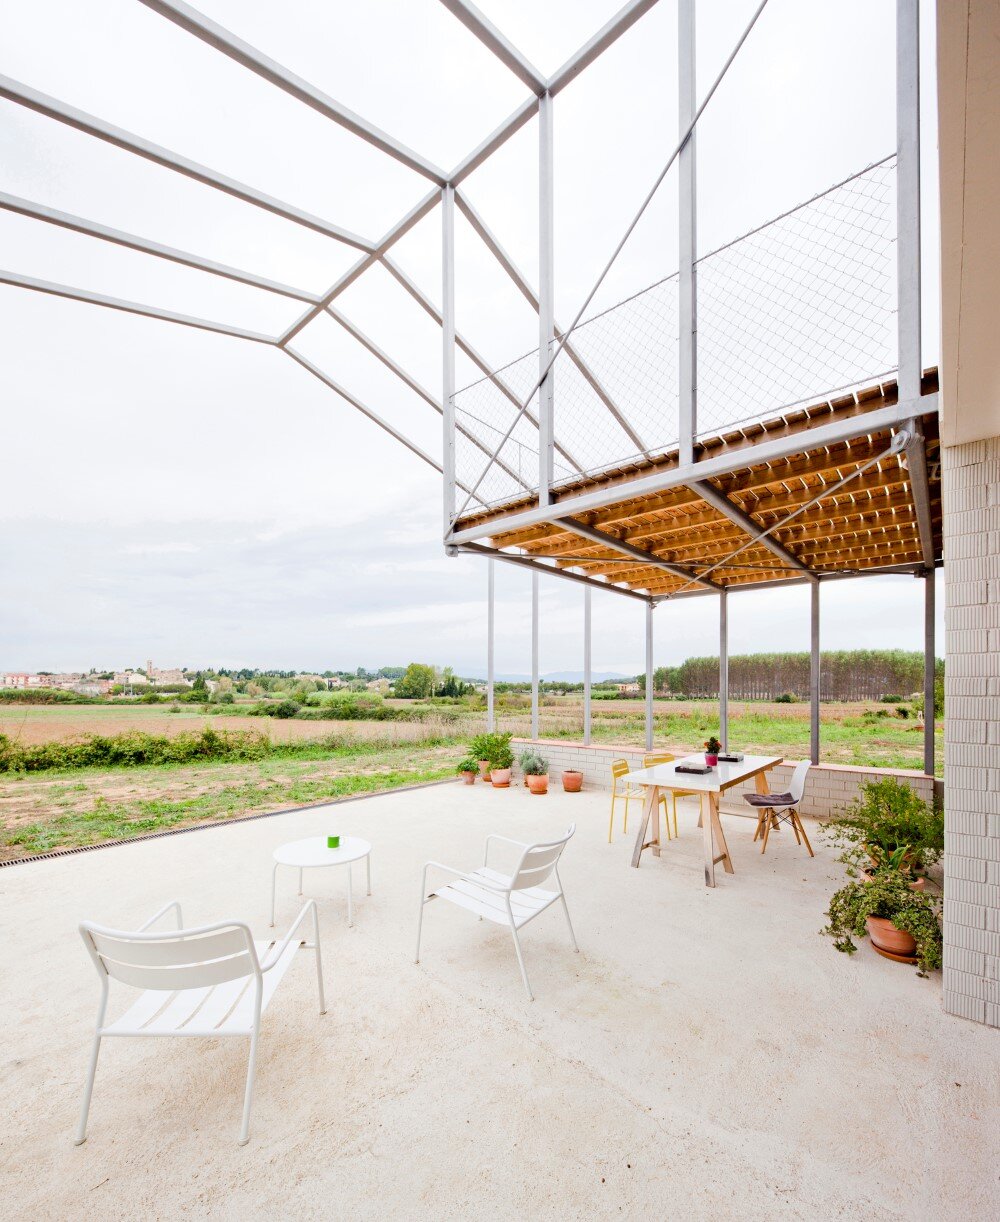 MMMMMS House Provides a Straight Relationship with the Surrounding Landscape (5)